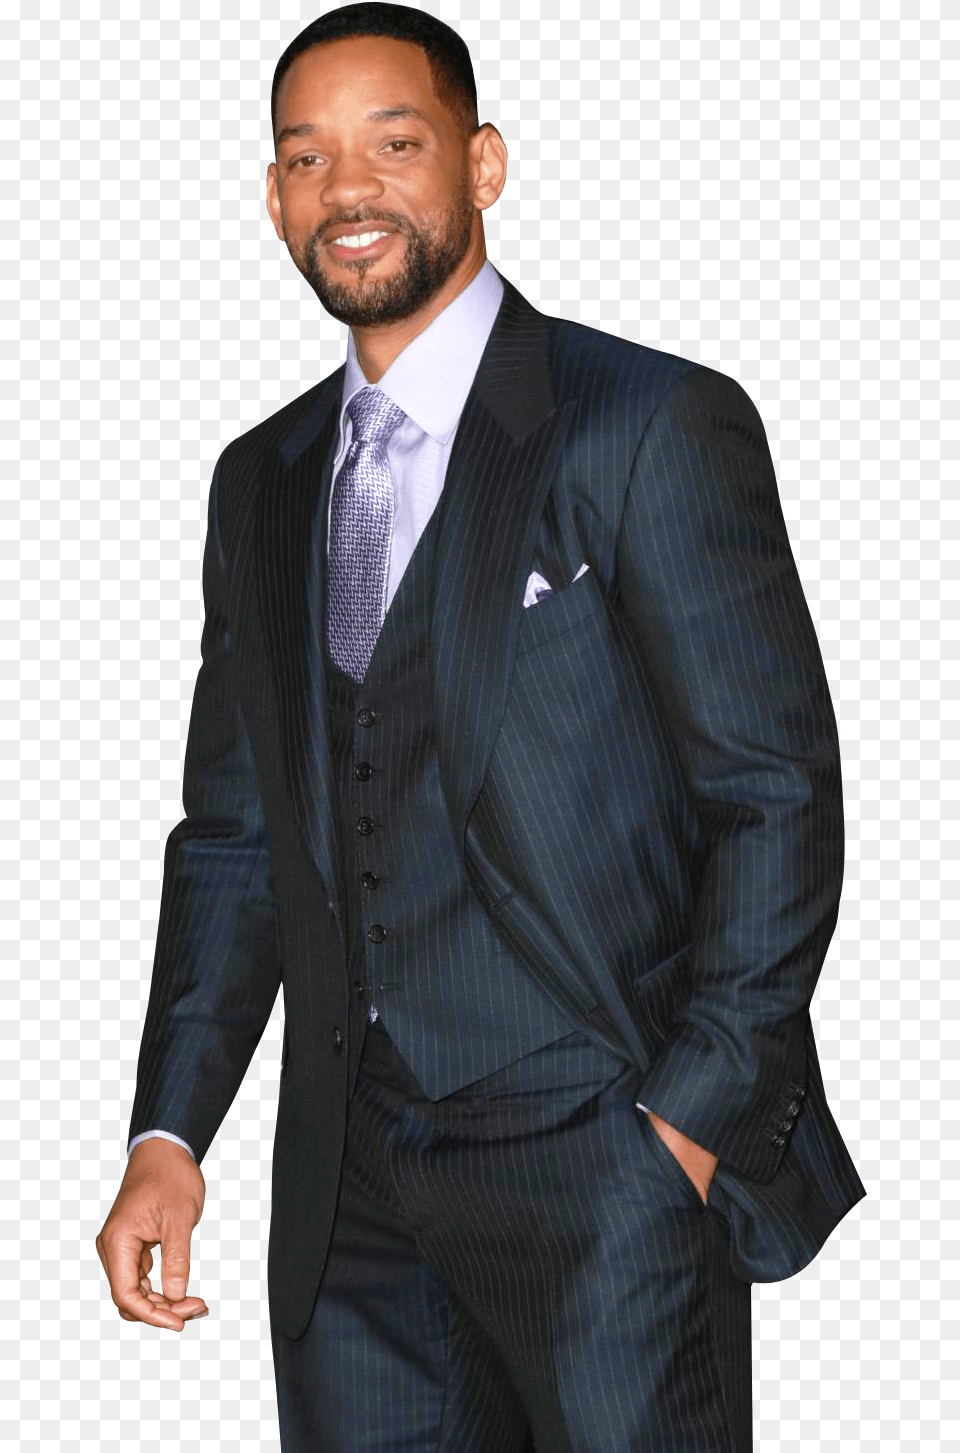 Will Smith Transparent Image Will Smith Transparente, Tuxedo, Suit, Clothing, Formal Wear Free Png